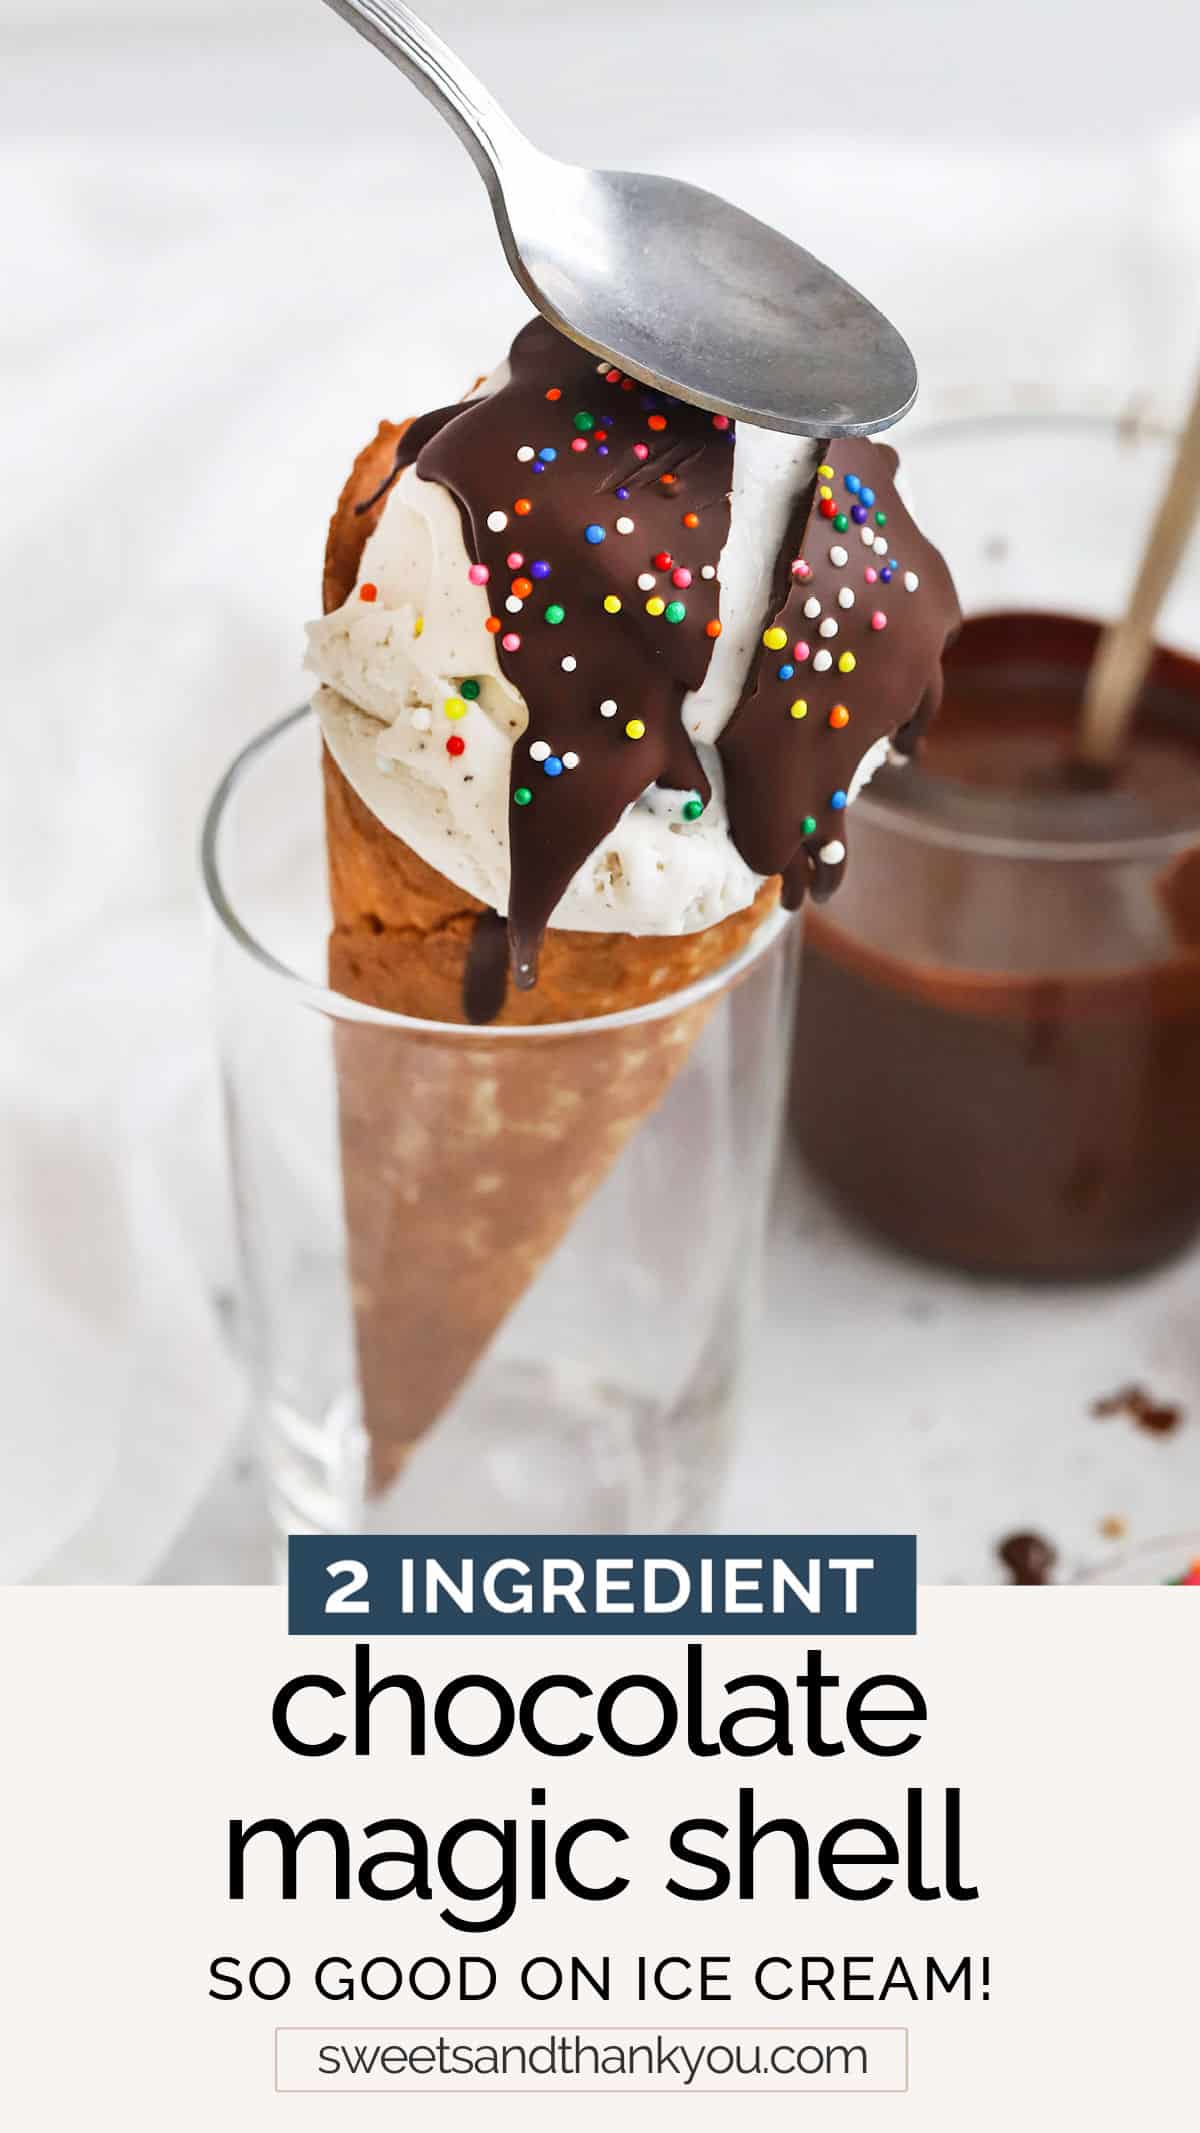 Easy 2-Ingredient Chocolate Shell For Ice Cream - This homemade magic shell topping recipe adds a perfect chocolatey crunch to your favorite scoop of ice cream! // Homemade chocolate magic shell // healthy magic shell // vegan magic shell // vegan chocolate shell // healthy chocolate shell // homemade magic shell for ice cream // Chocolate sauce for ice cream // ice cream chocolate sauce 